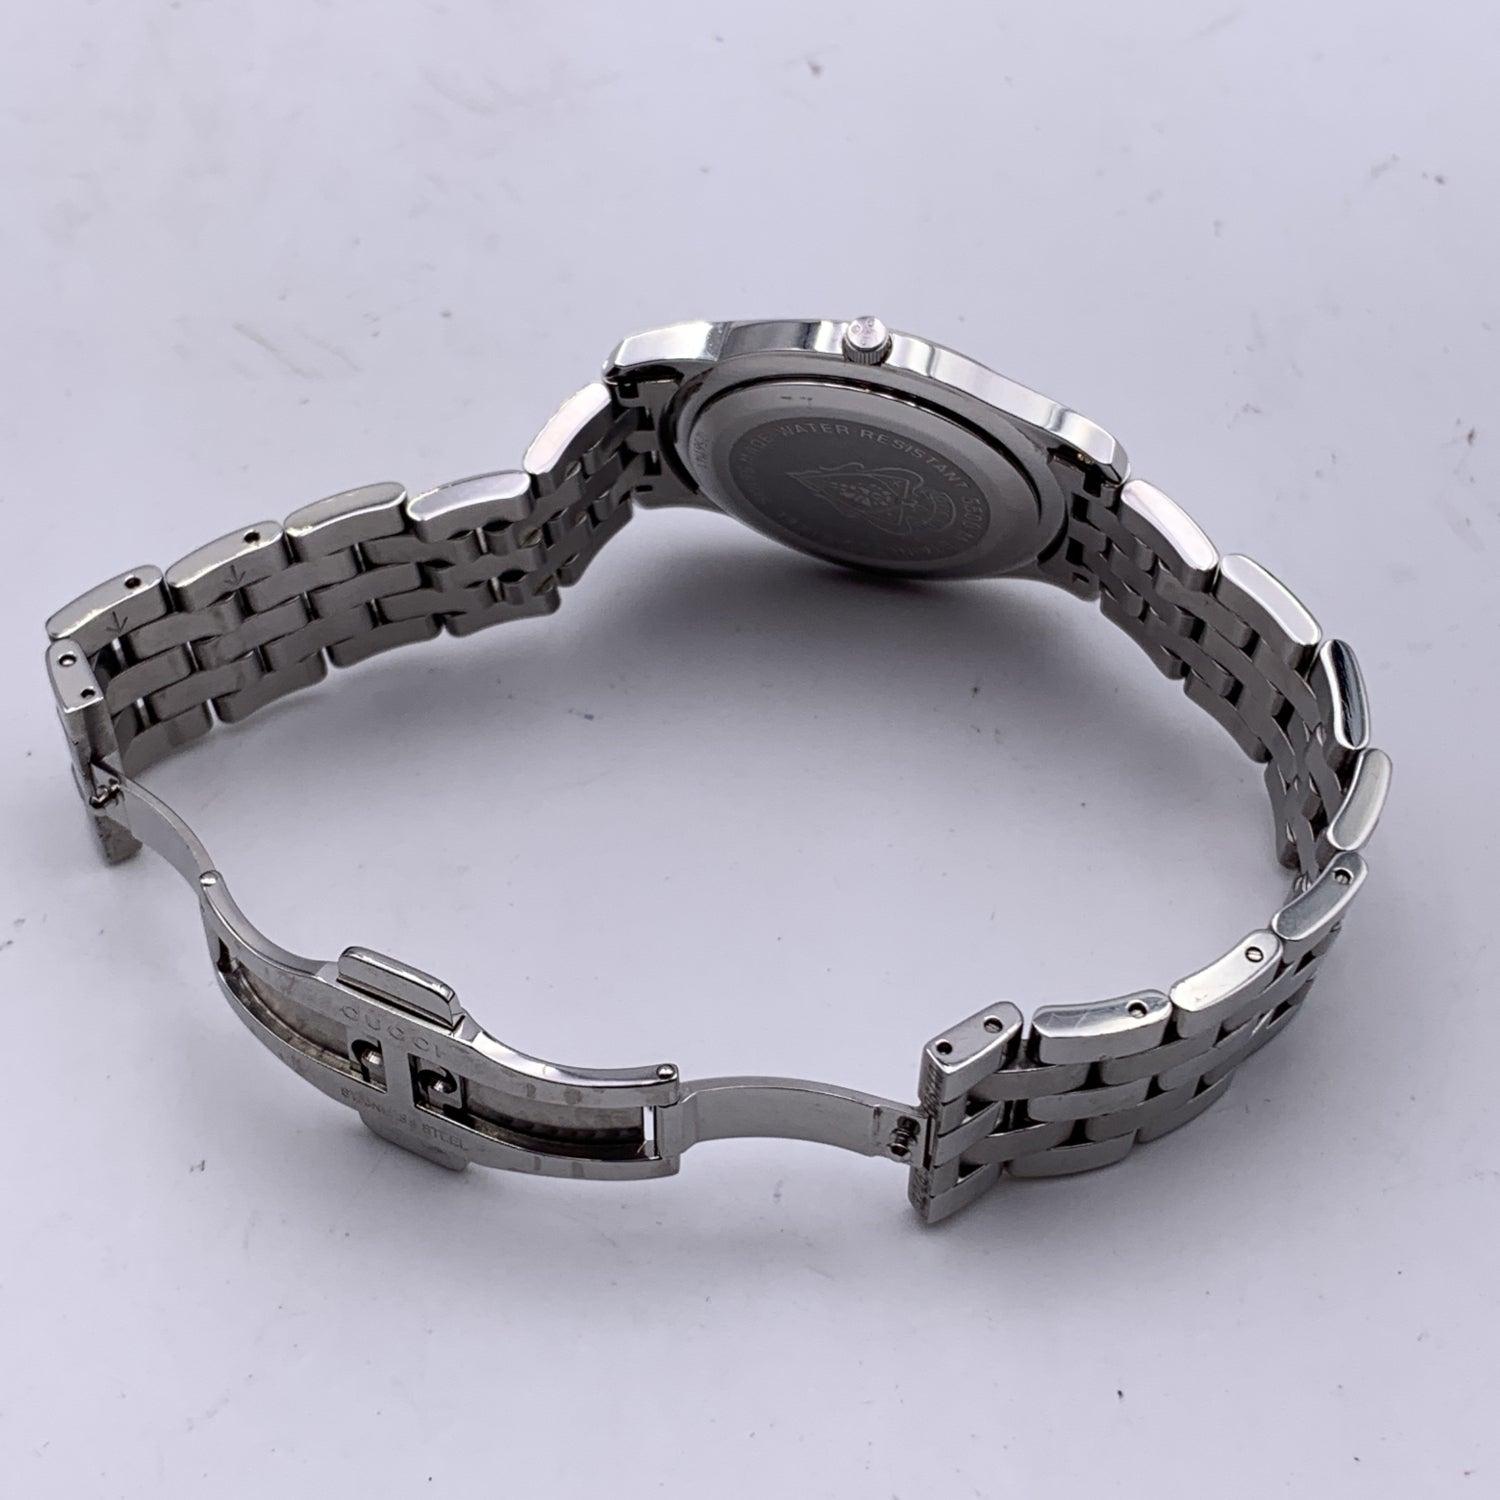 Gucci Silver Stainless Steel Mod 5500 M Quartz Wrist Watch Black In Excellent Condition For Sale In Rome, Rome